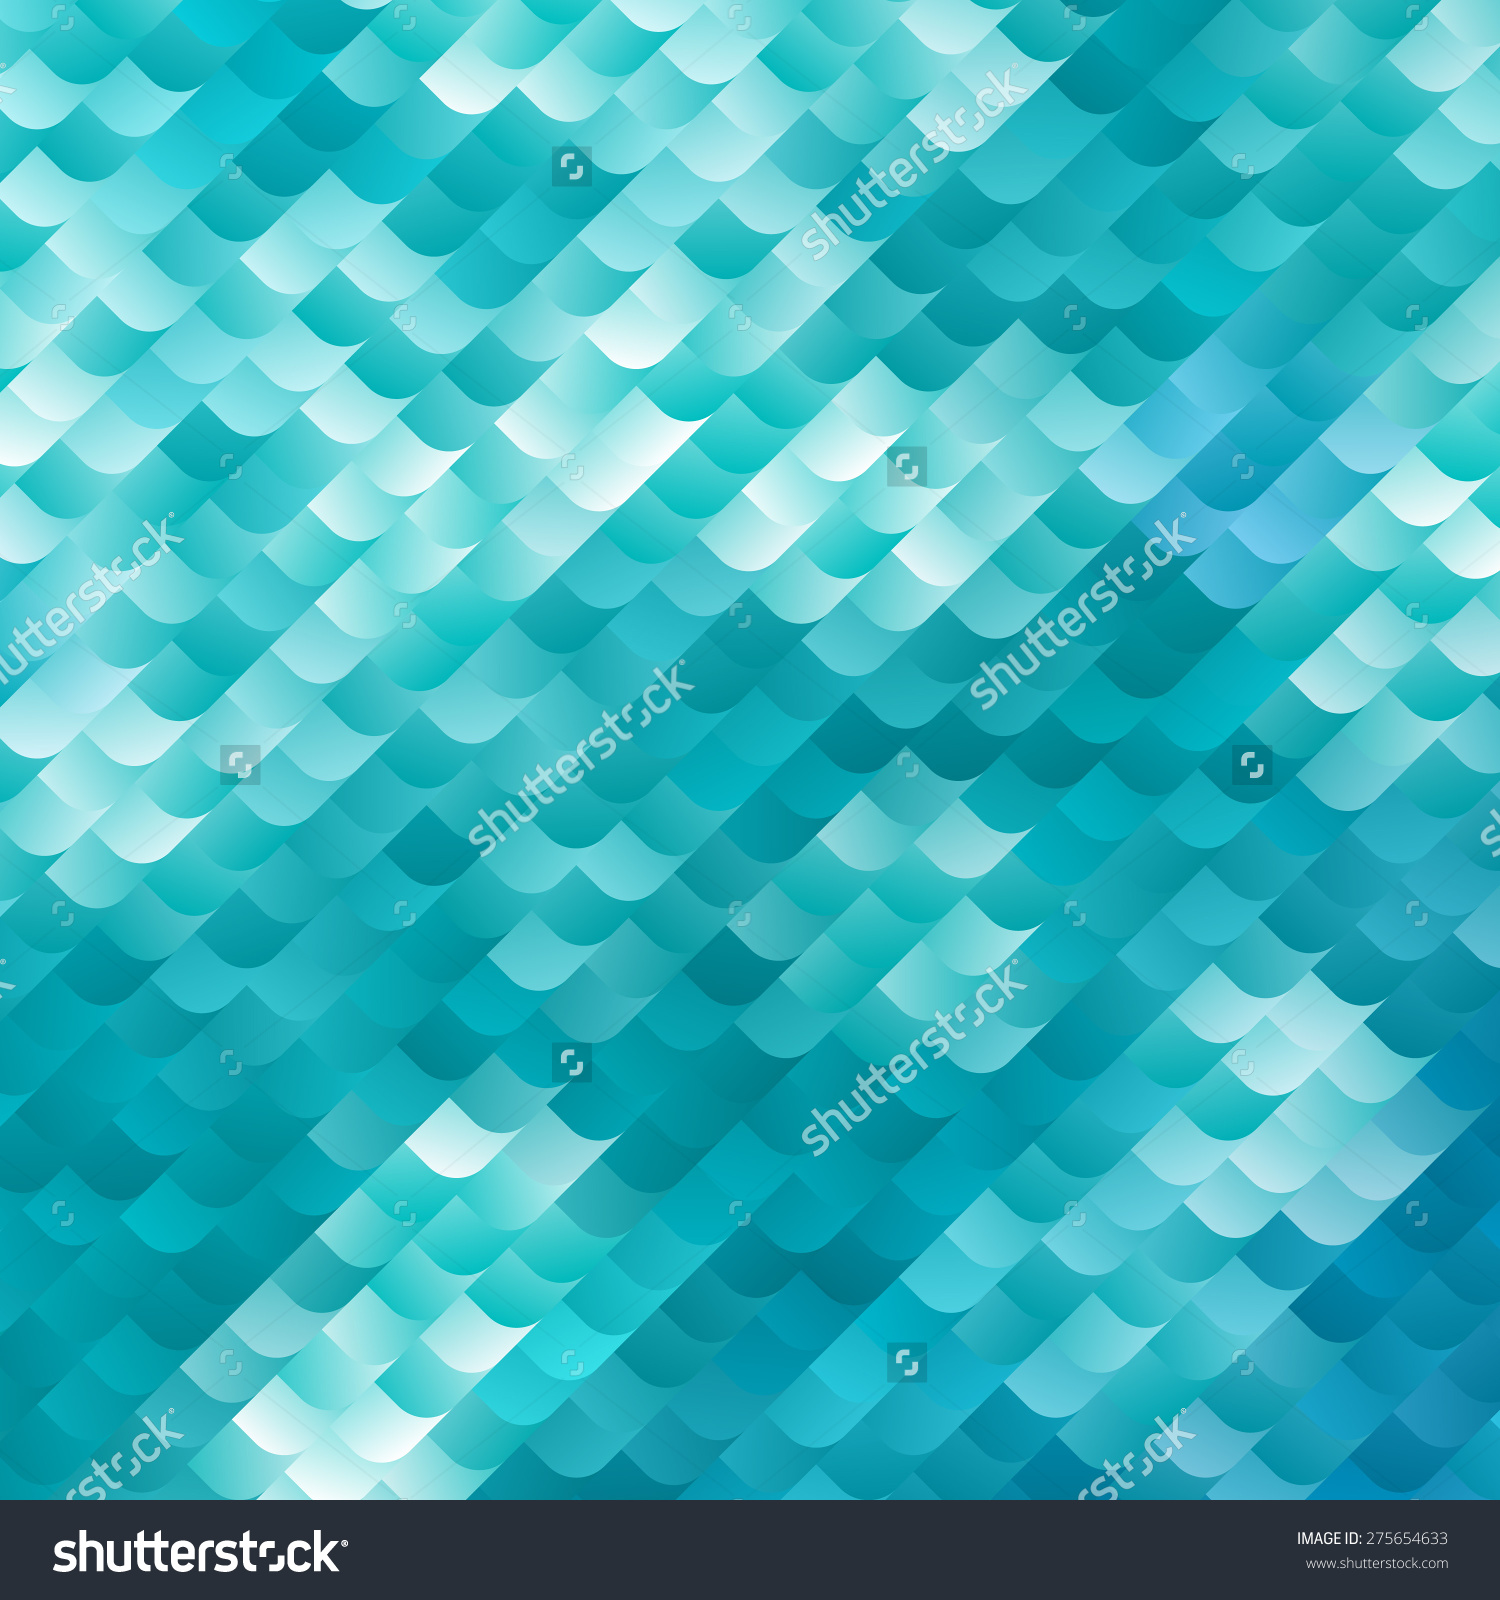 Blue and White Dynamic Background Vector Mosaic Texture Abstract